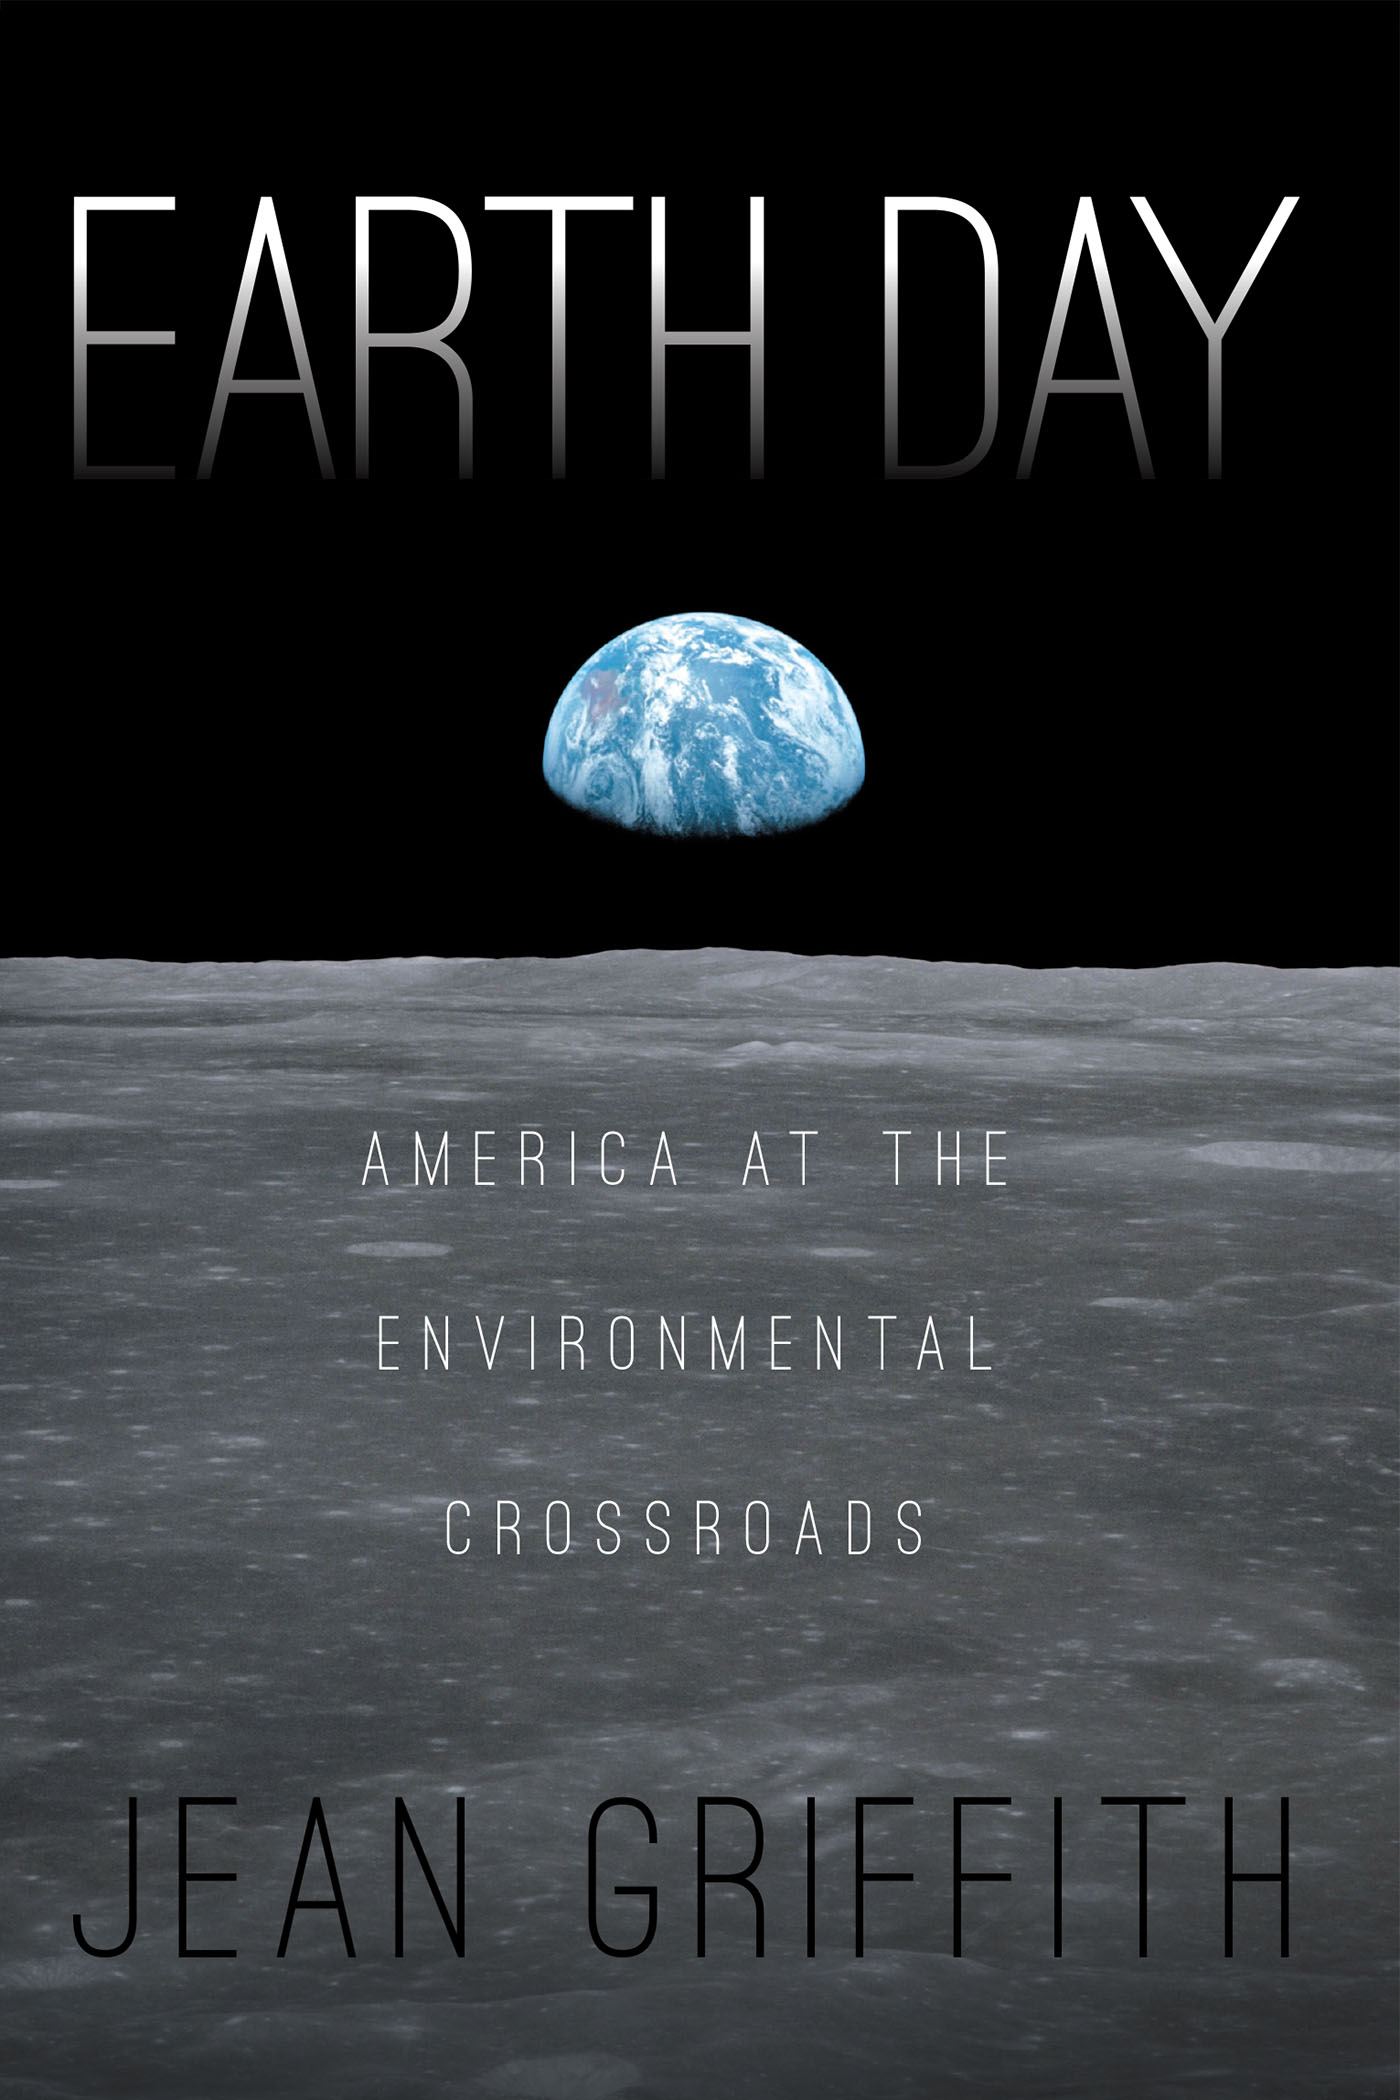 Earth Day Cover Image